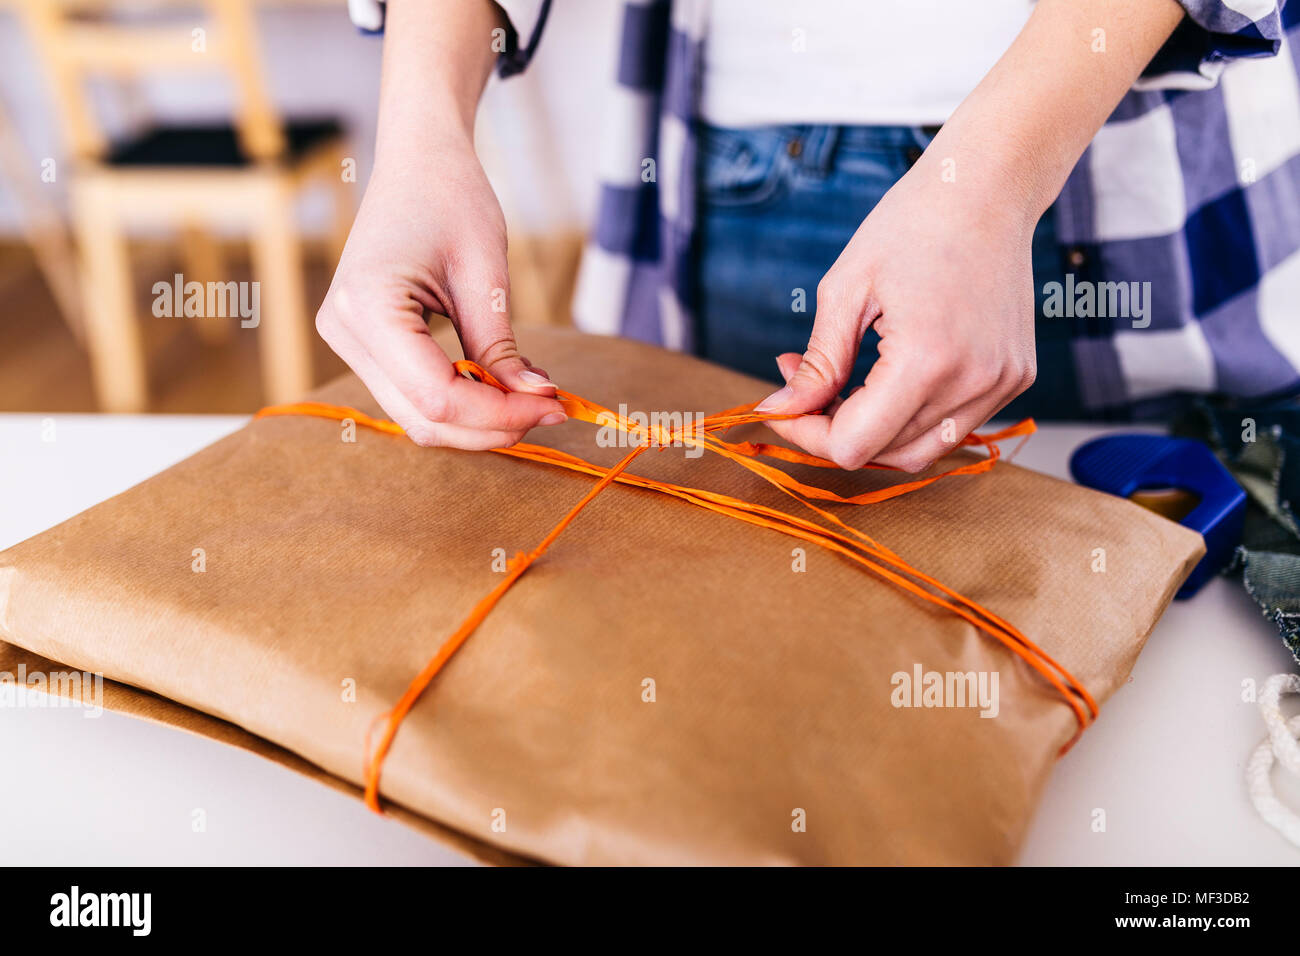 Close-up of woman wrapping a package Stock Photo